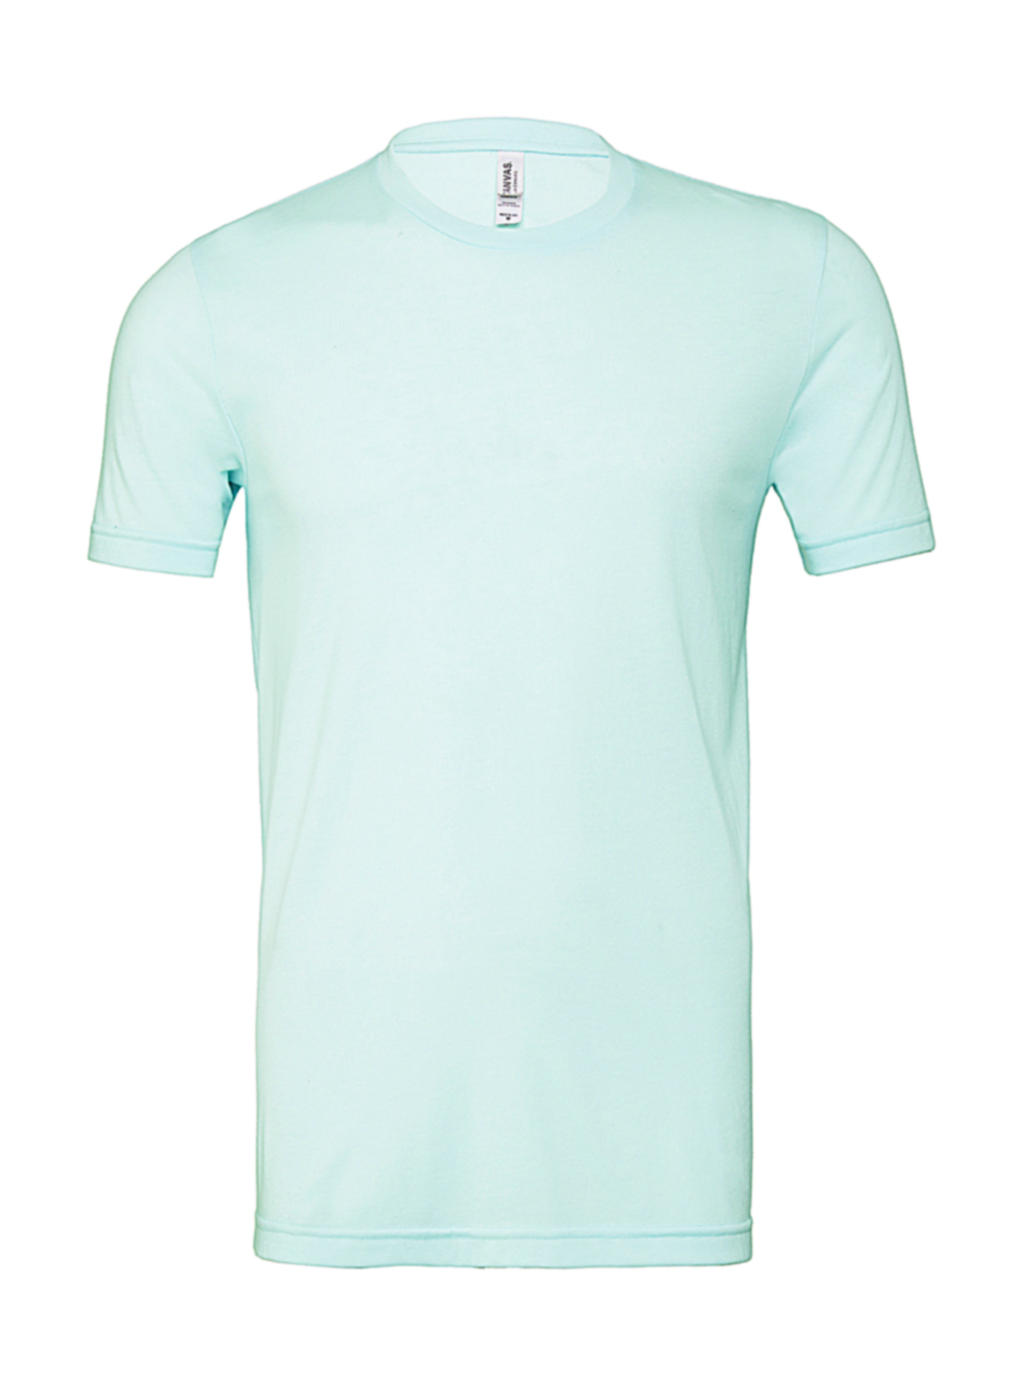  Unisex Triblend Short Sleeve Tee in Farbe Ice Blue Triblend